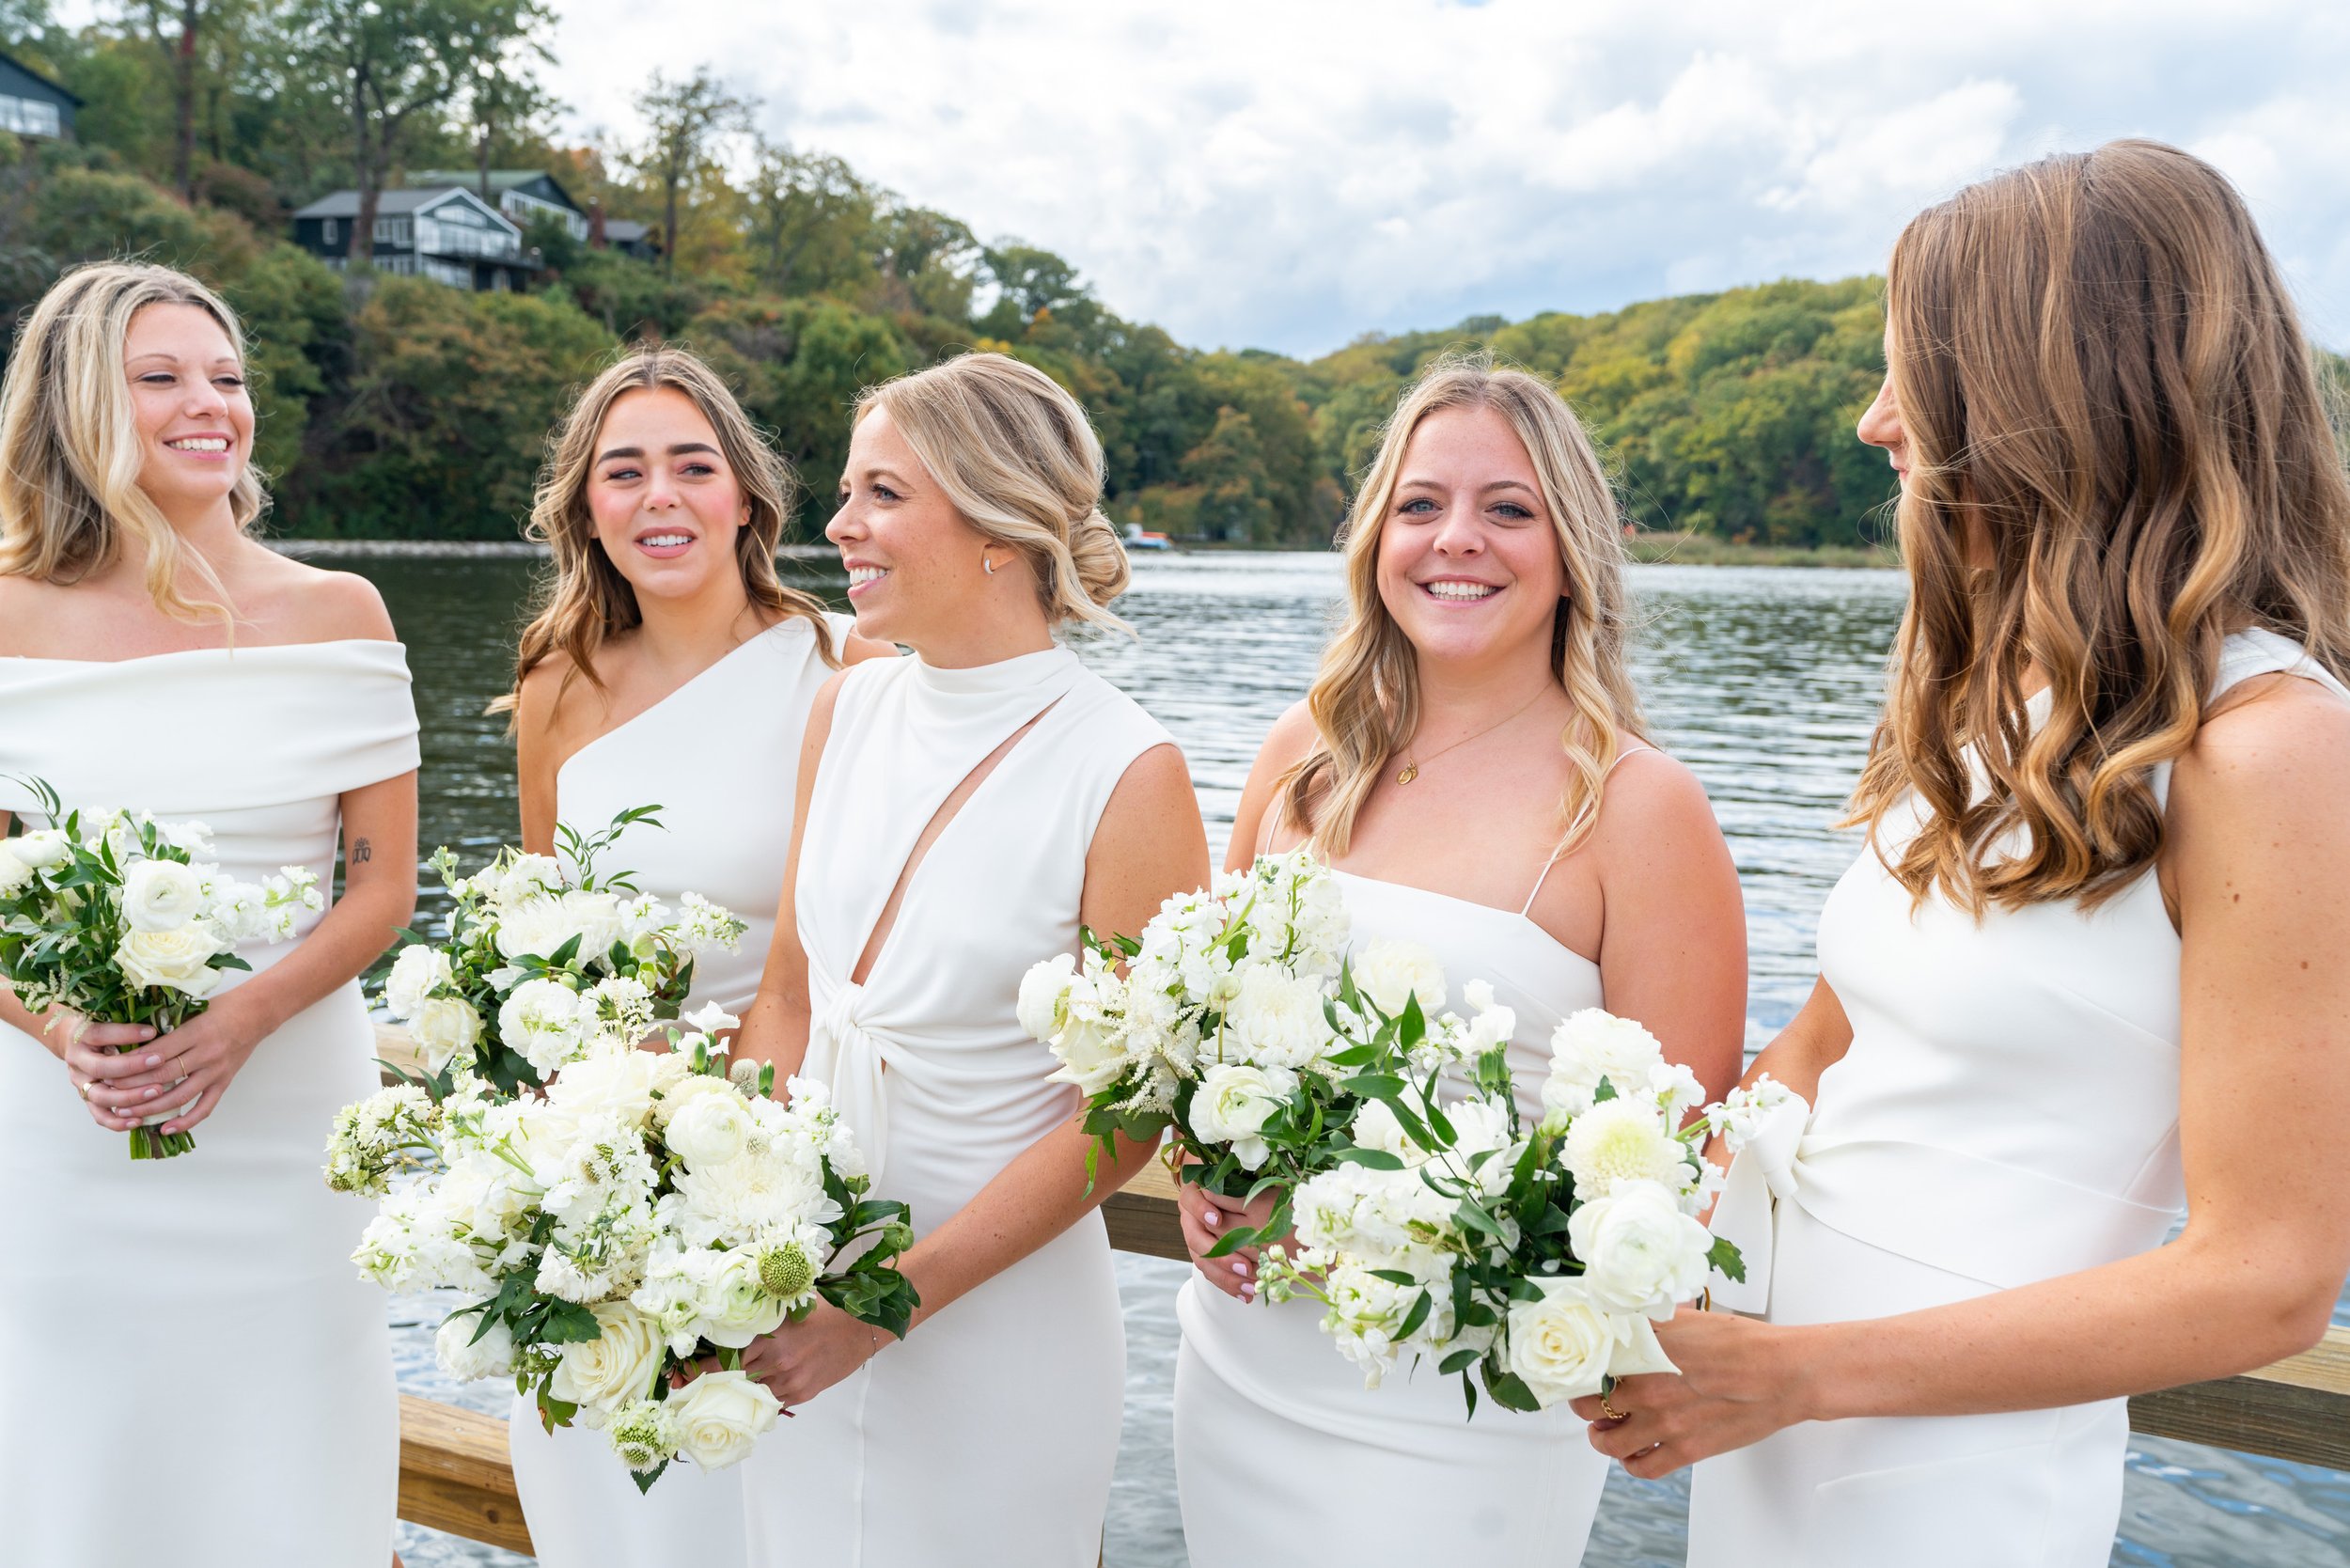 Bride smiles with bridesmaids all wearing white